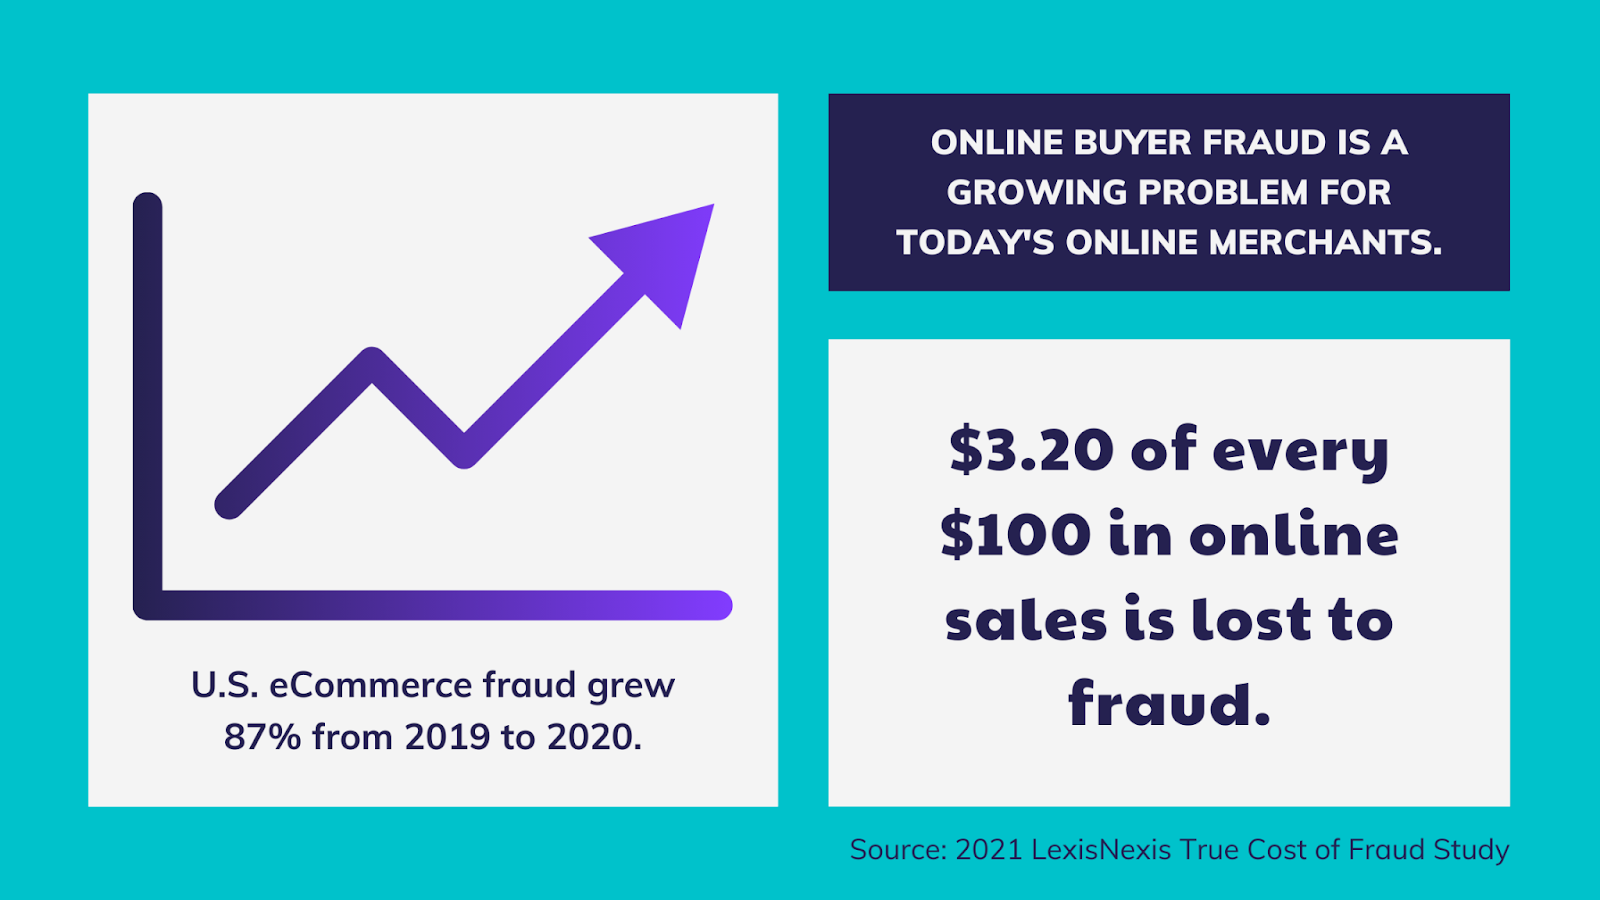 Black List: Online buyer fraud is a growing problem for today's online merchants